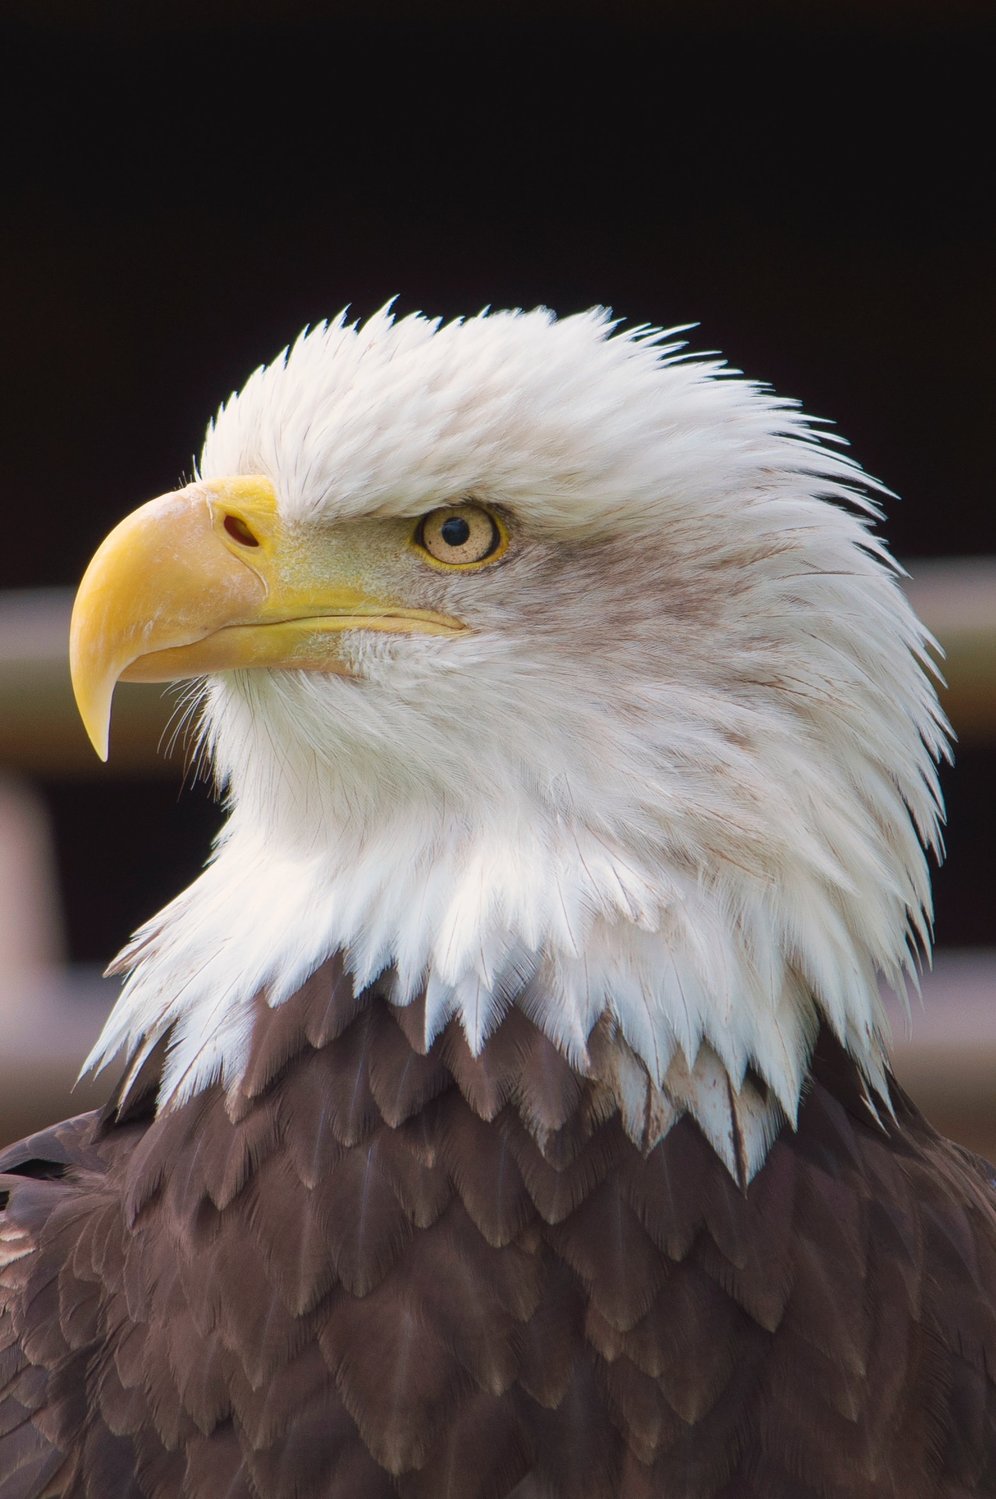 A bald eagle, native to these parts.